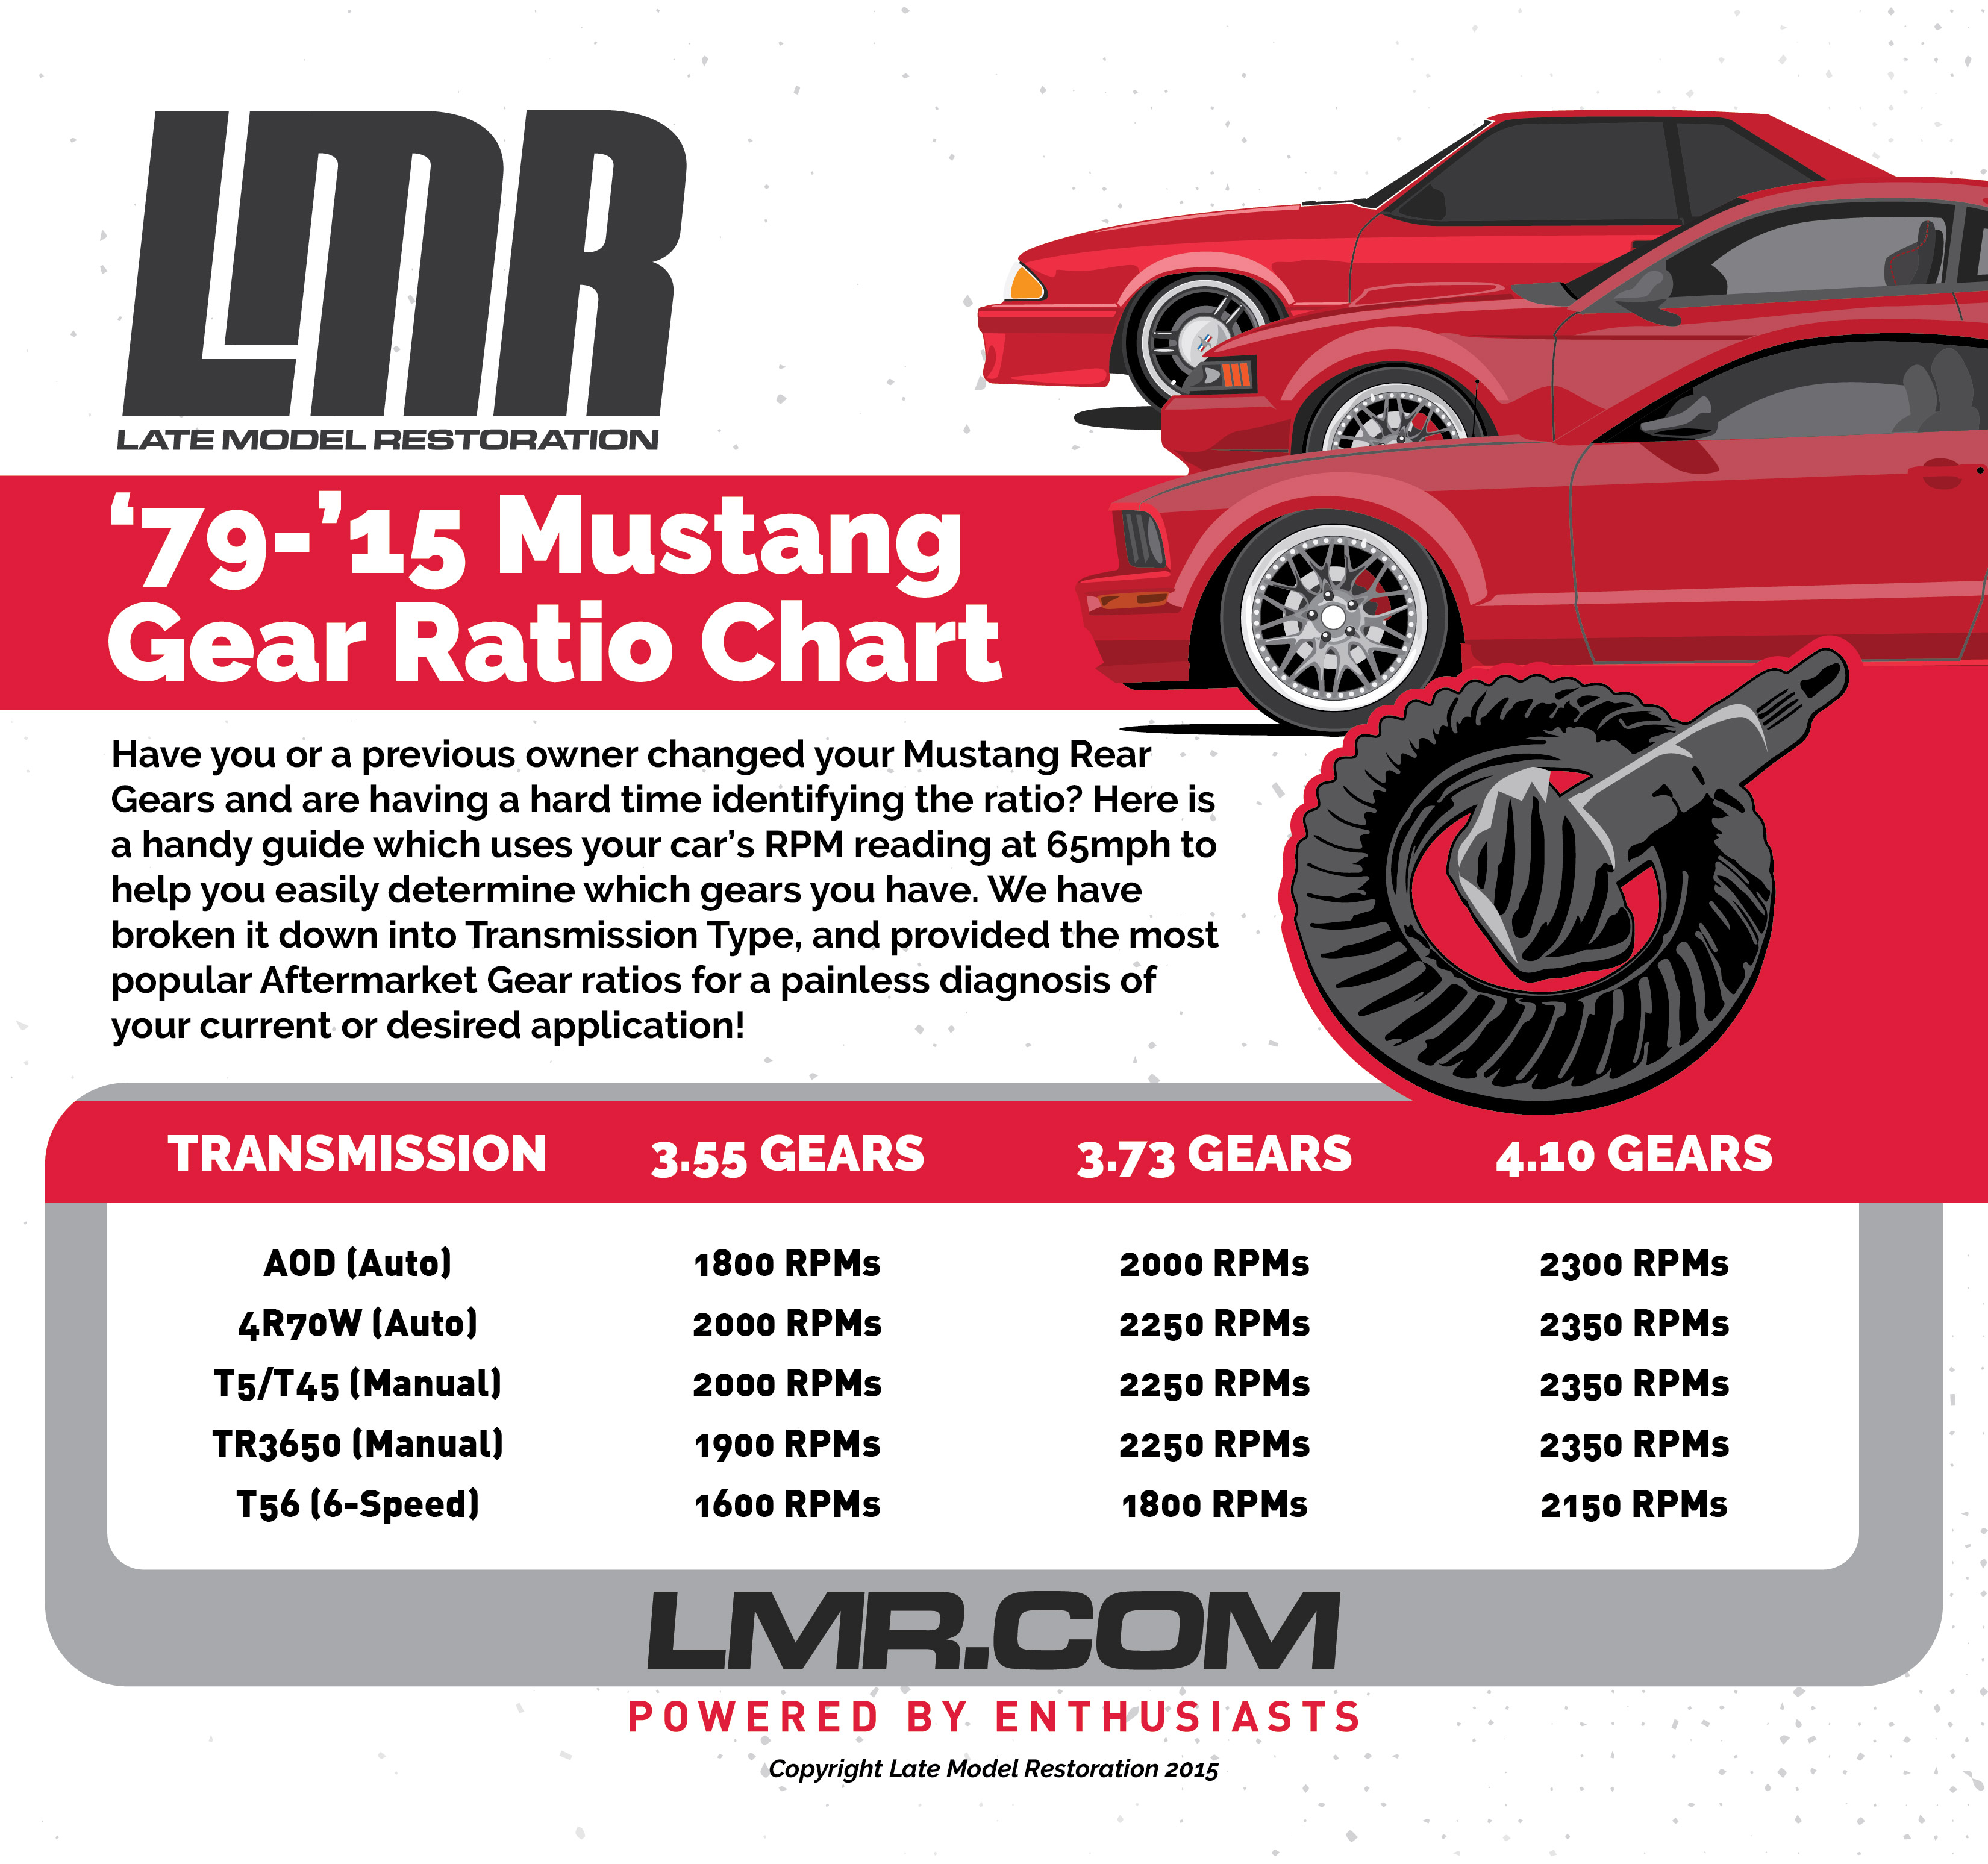 Mustang Rear Gear Ratio To RPM Chart - Mustang Rear Gear Ratio To RPM Chart